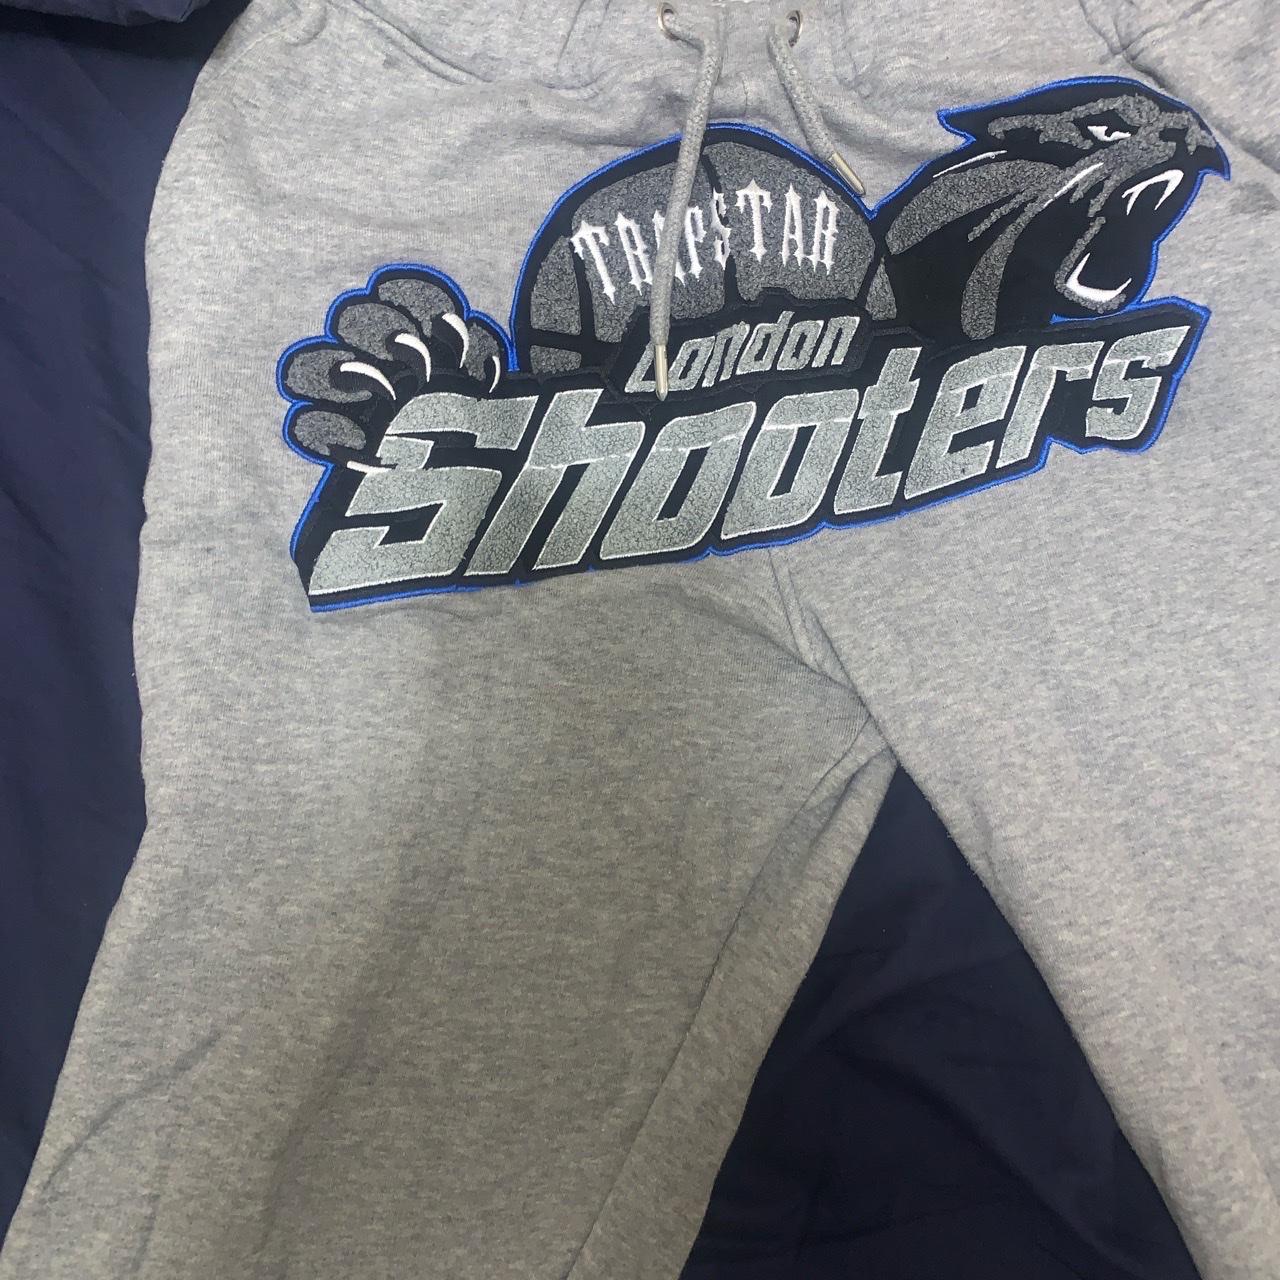 Trapstar shooters tracksuit grey in a large in CT1 Canterbury for £130. ...